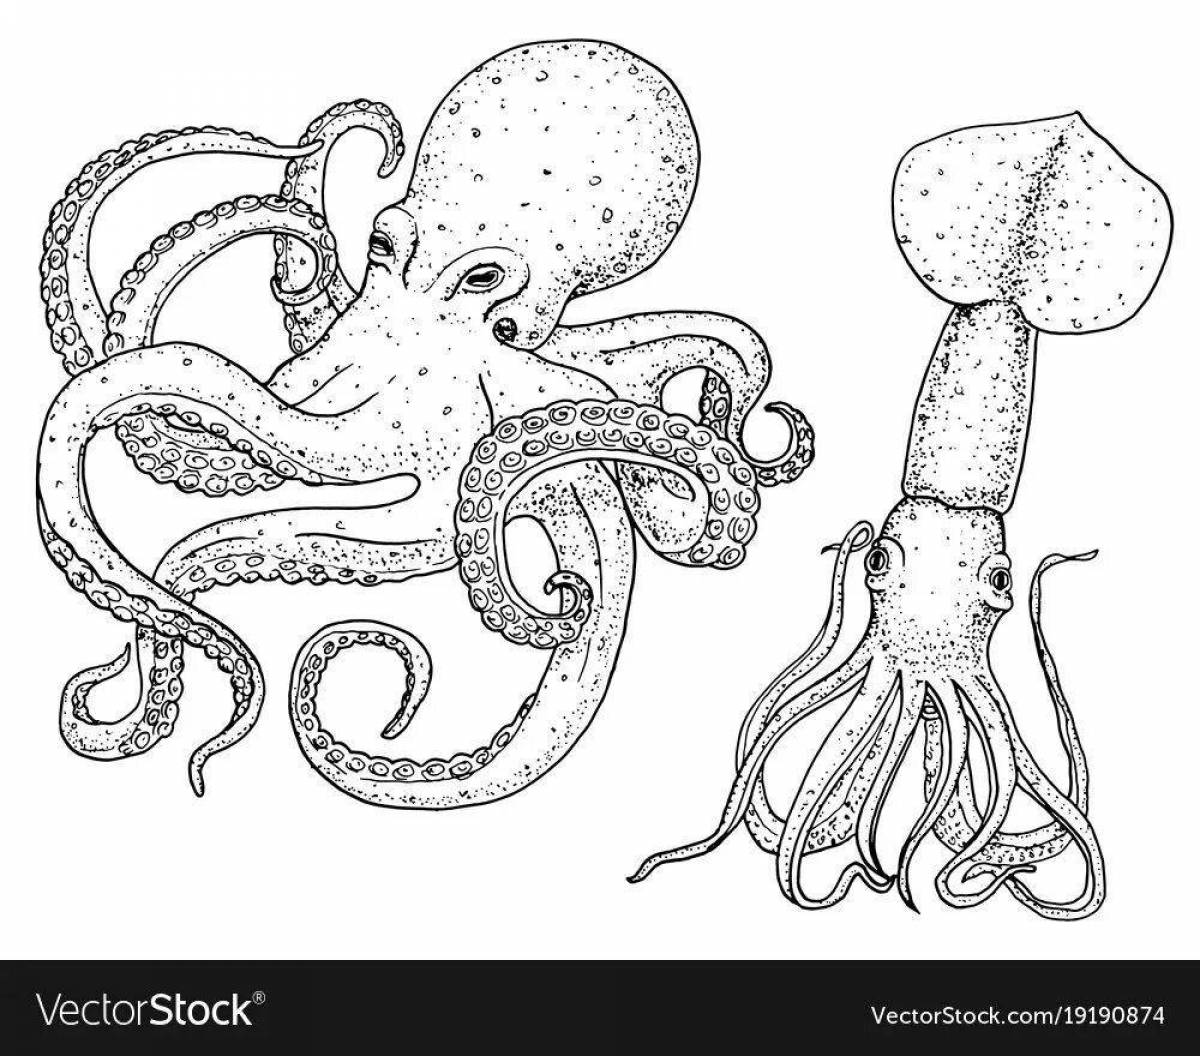 Smart squid coloring for kids